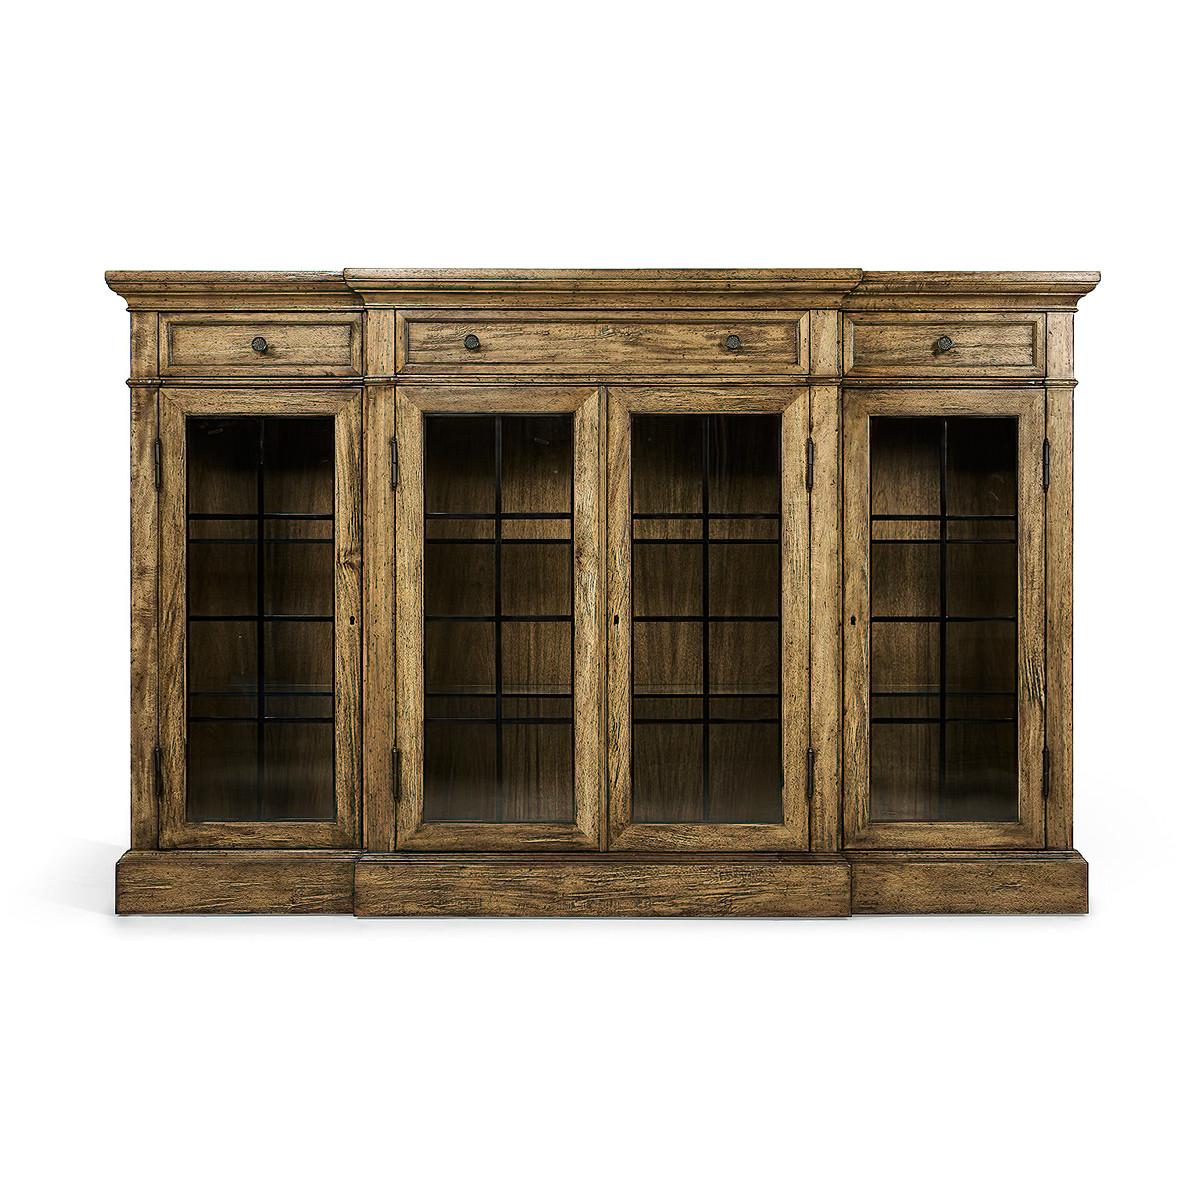 Country walnut four-door breakfront display cabinet in our medium driftwood distressed finish with interior lighting. The glazed doors flanked. Three shallow drawers at the top with brass handles.

Dimensions: 77 